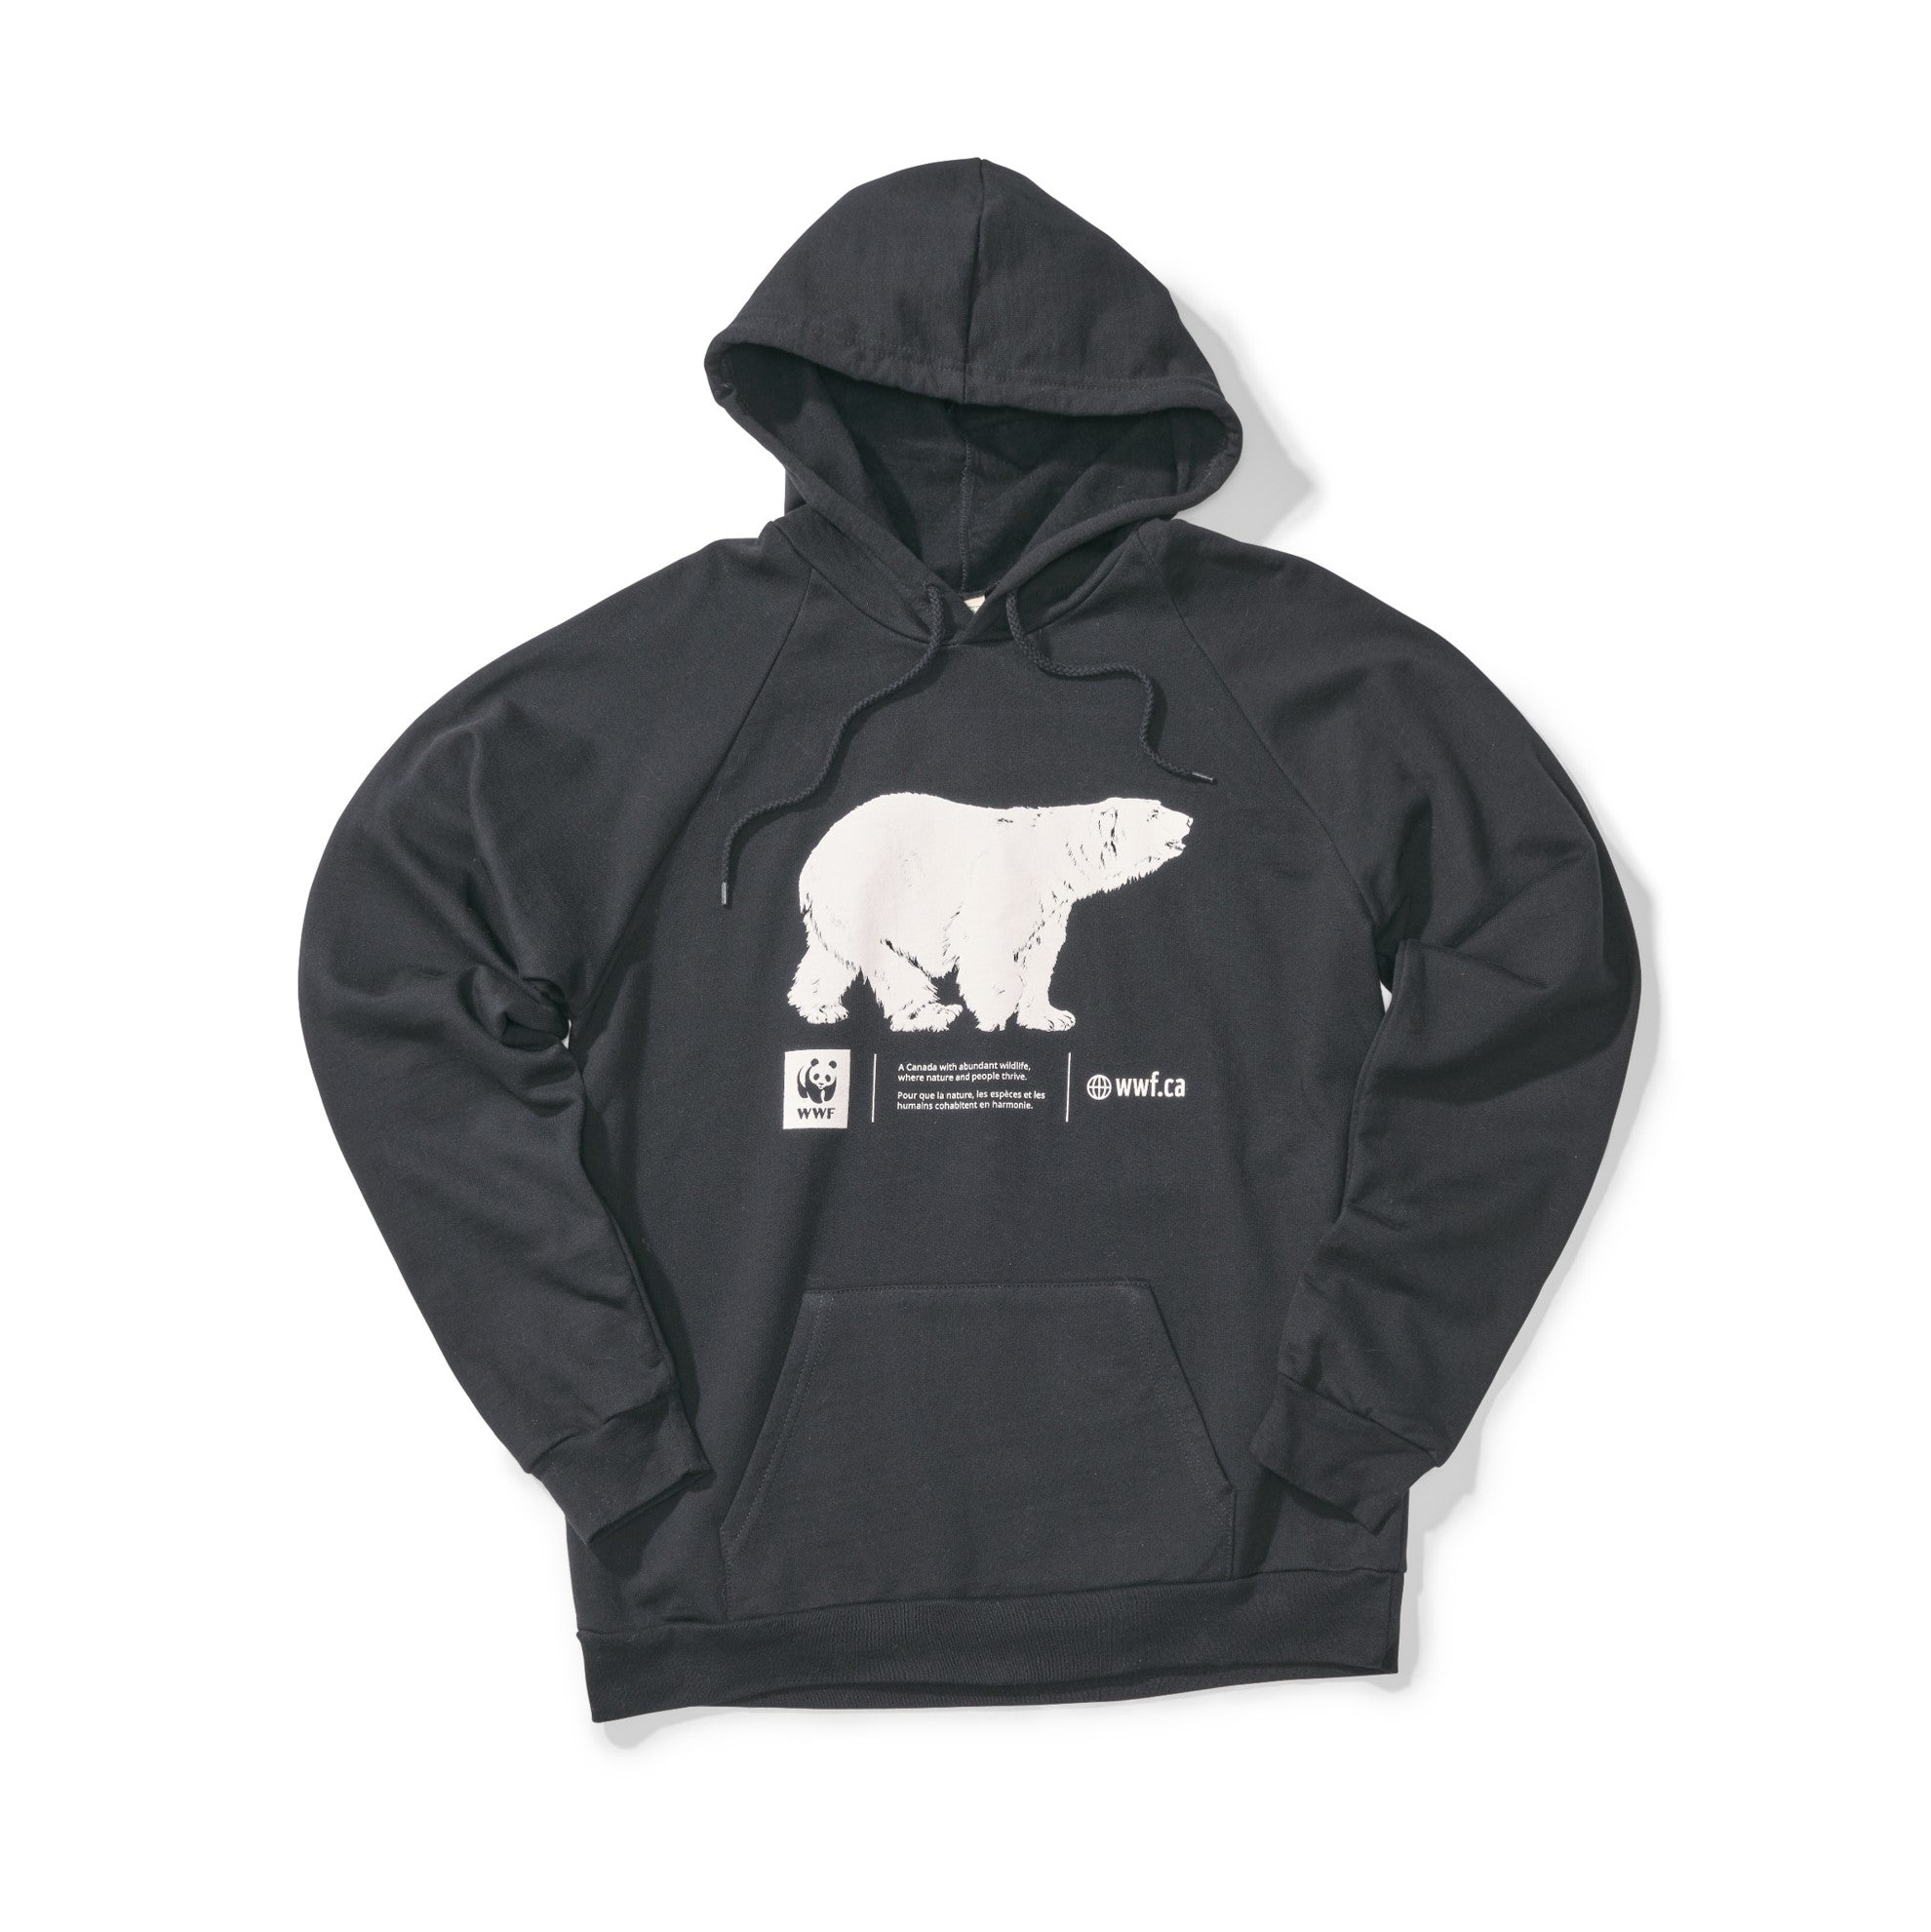 A photo of a black hoodie with a white polar bear illustration on the chest